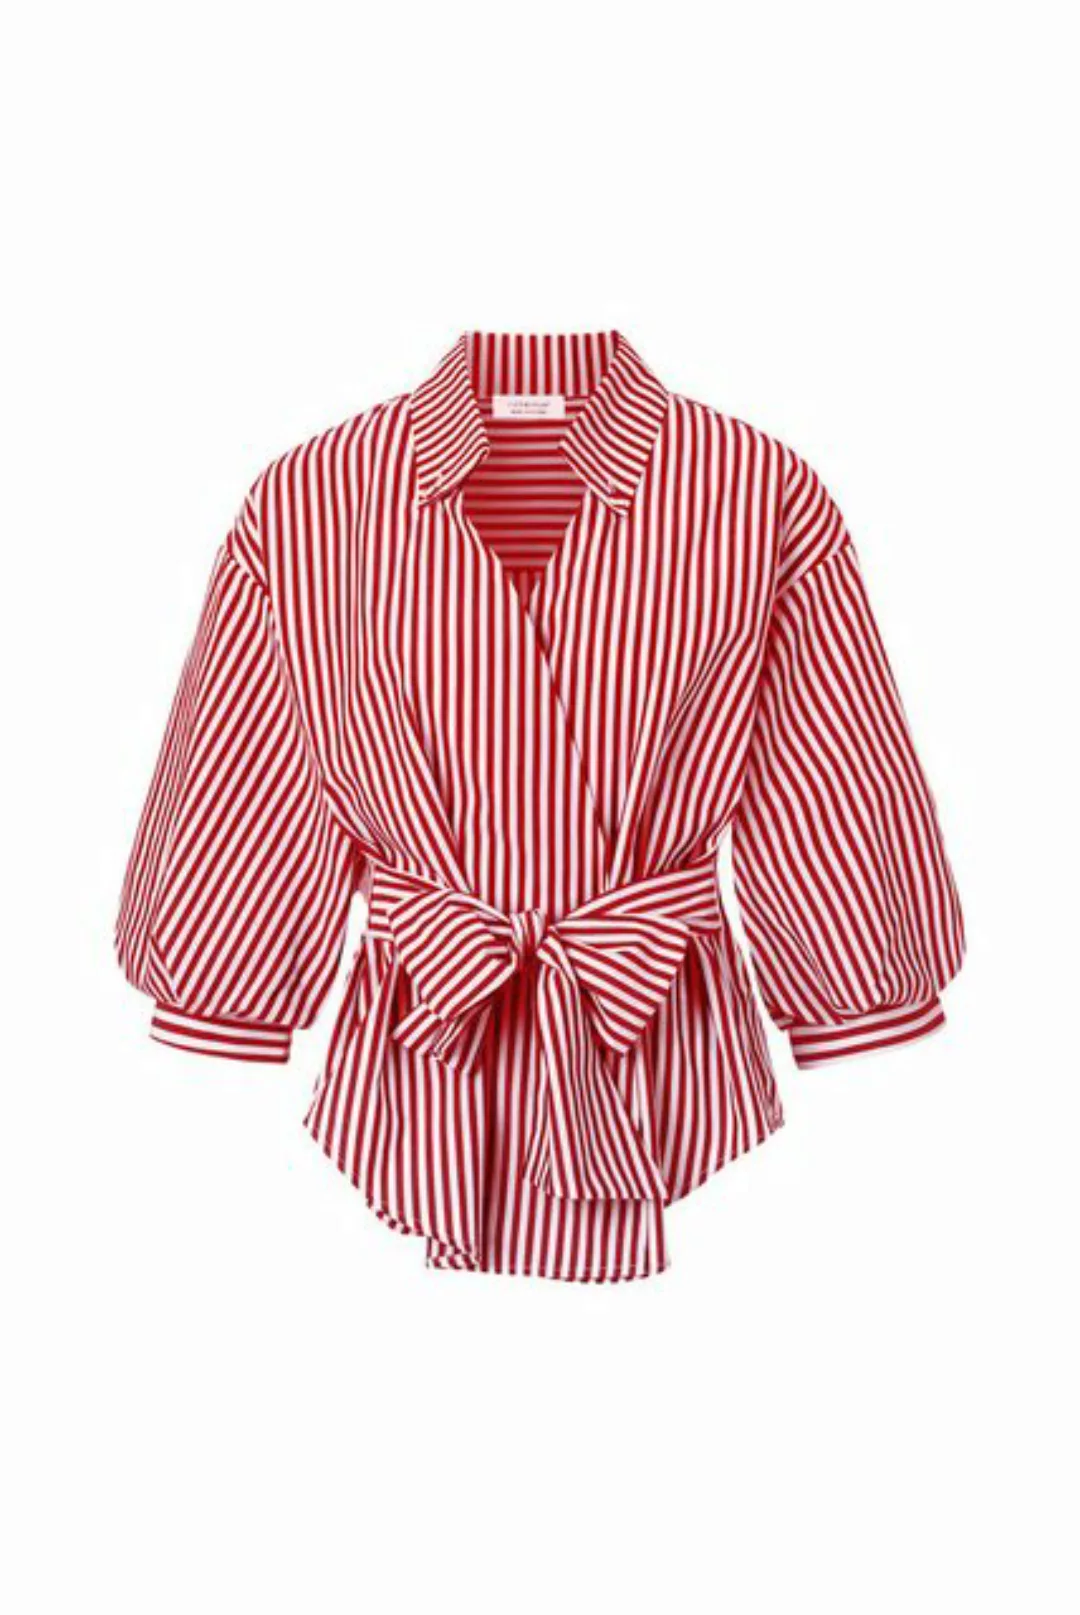 Rich & Royal Blusentop Striped blouse with puffed sleeves günstig online kaufen